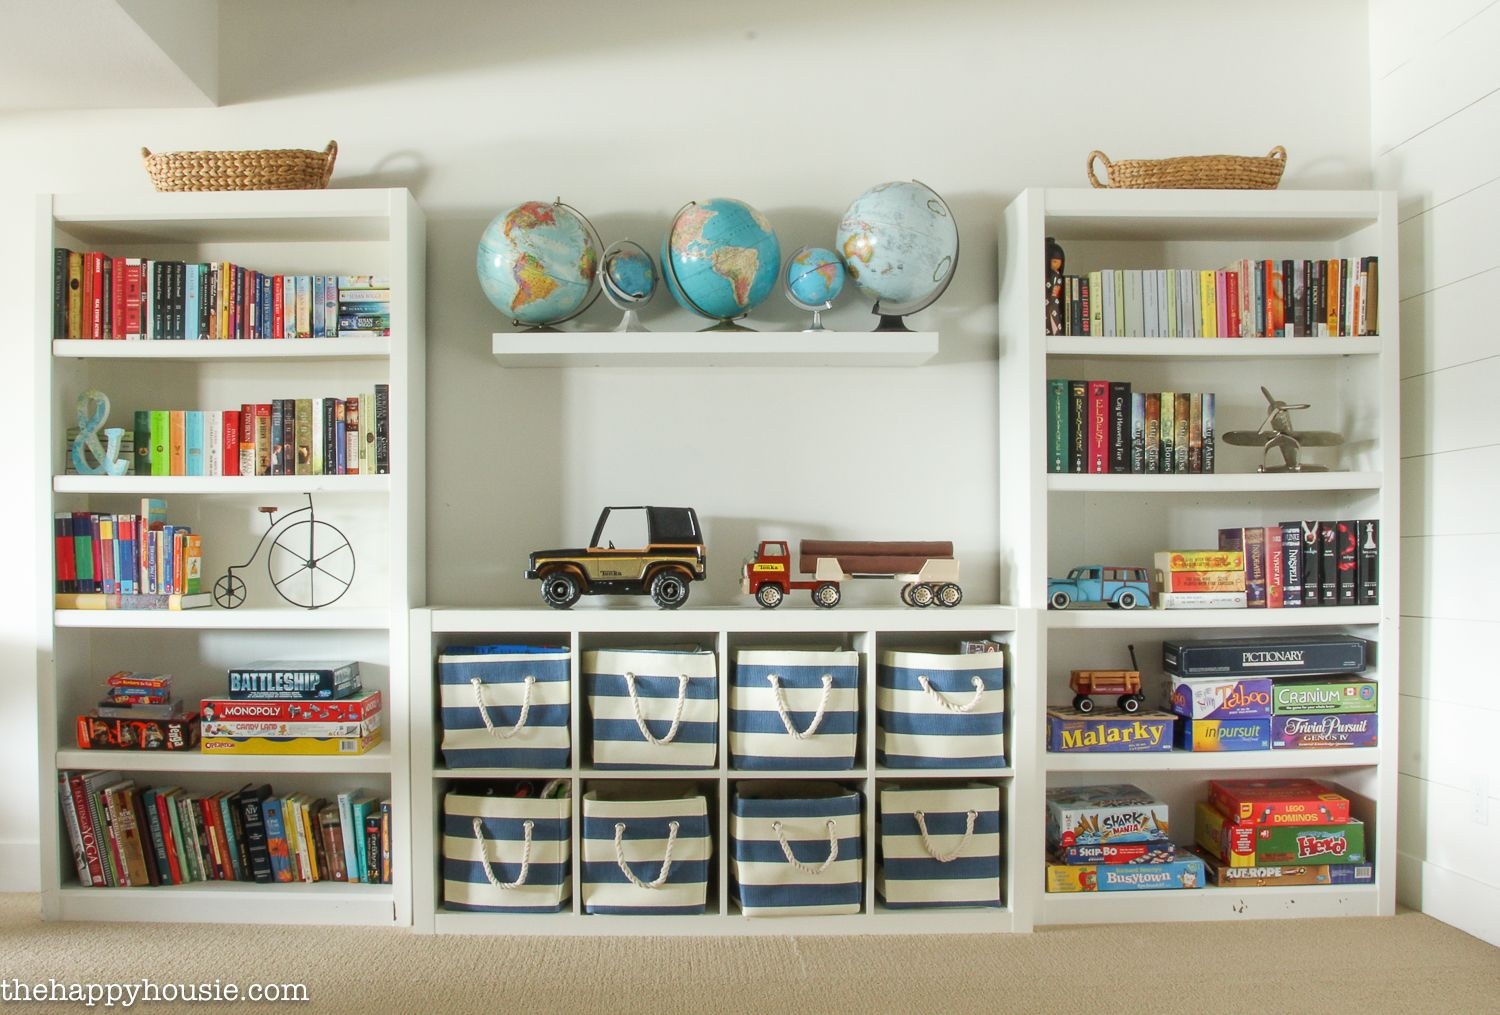 Kids Room Organizer
 Home News Articles Stories & Trends for Today